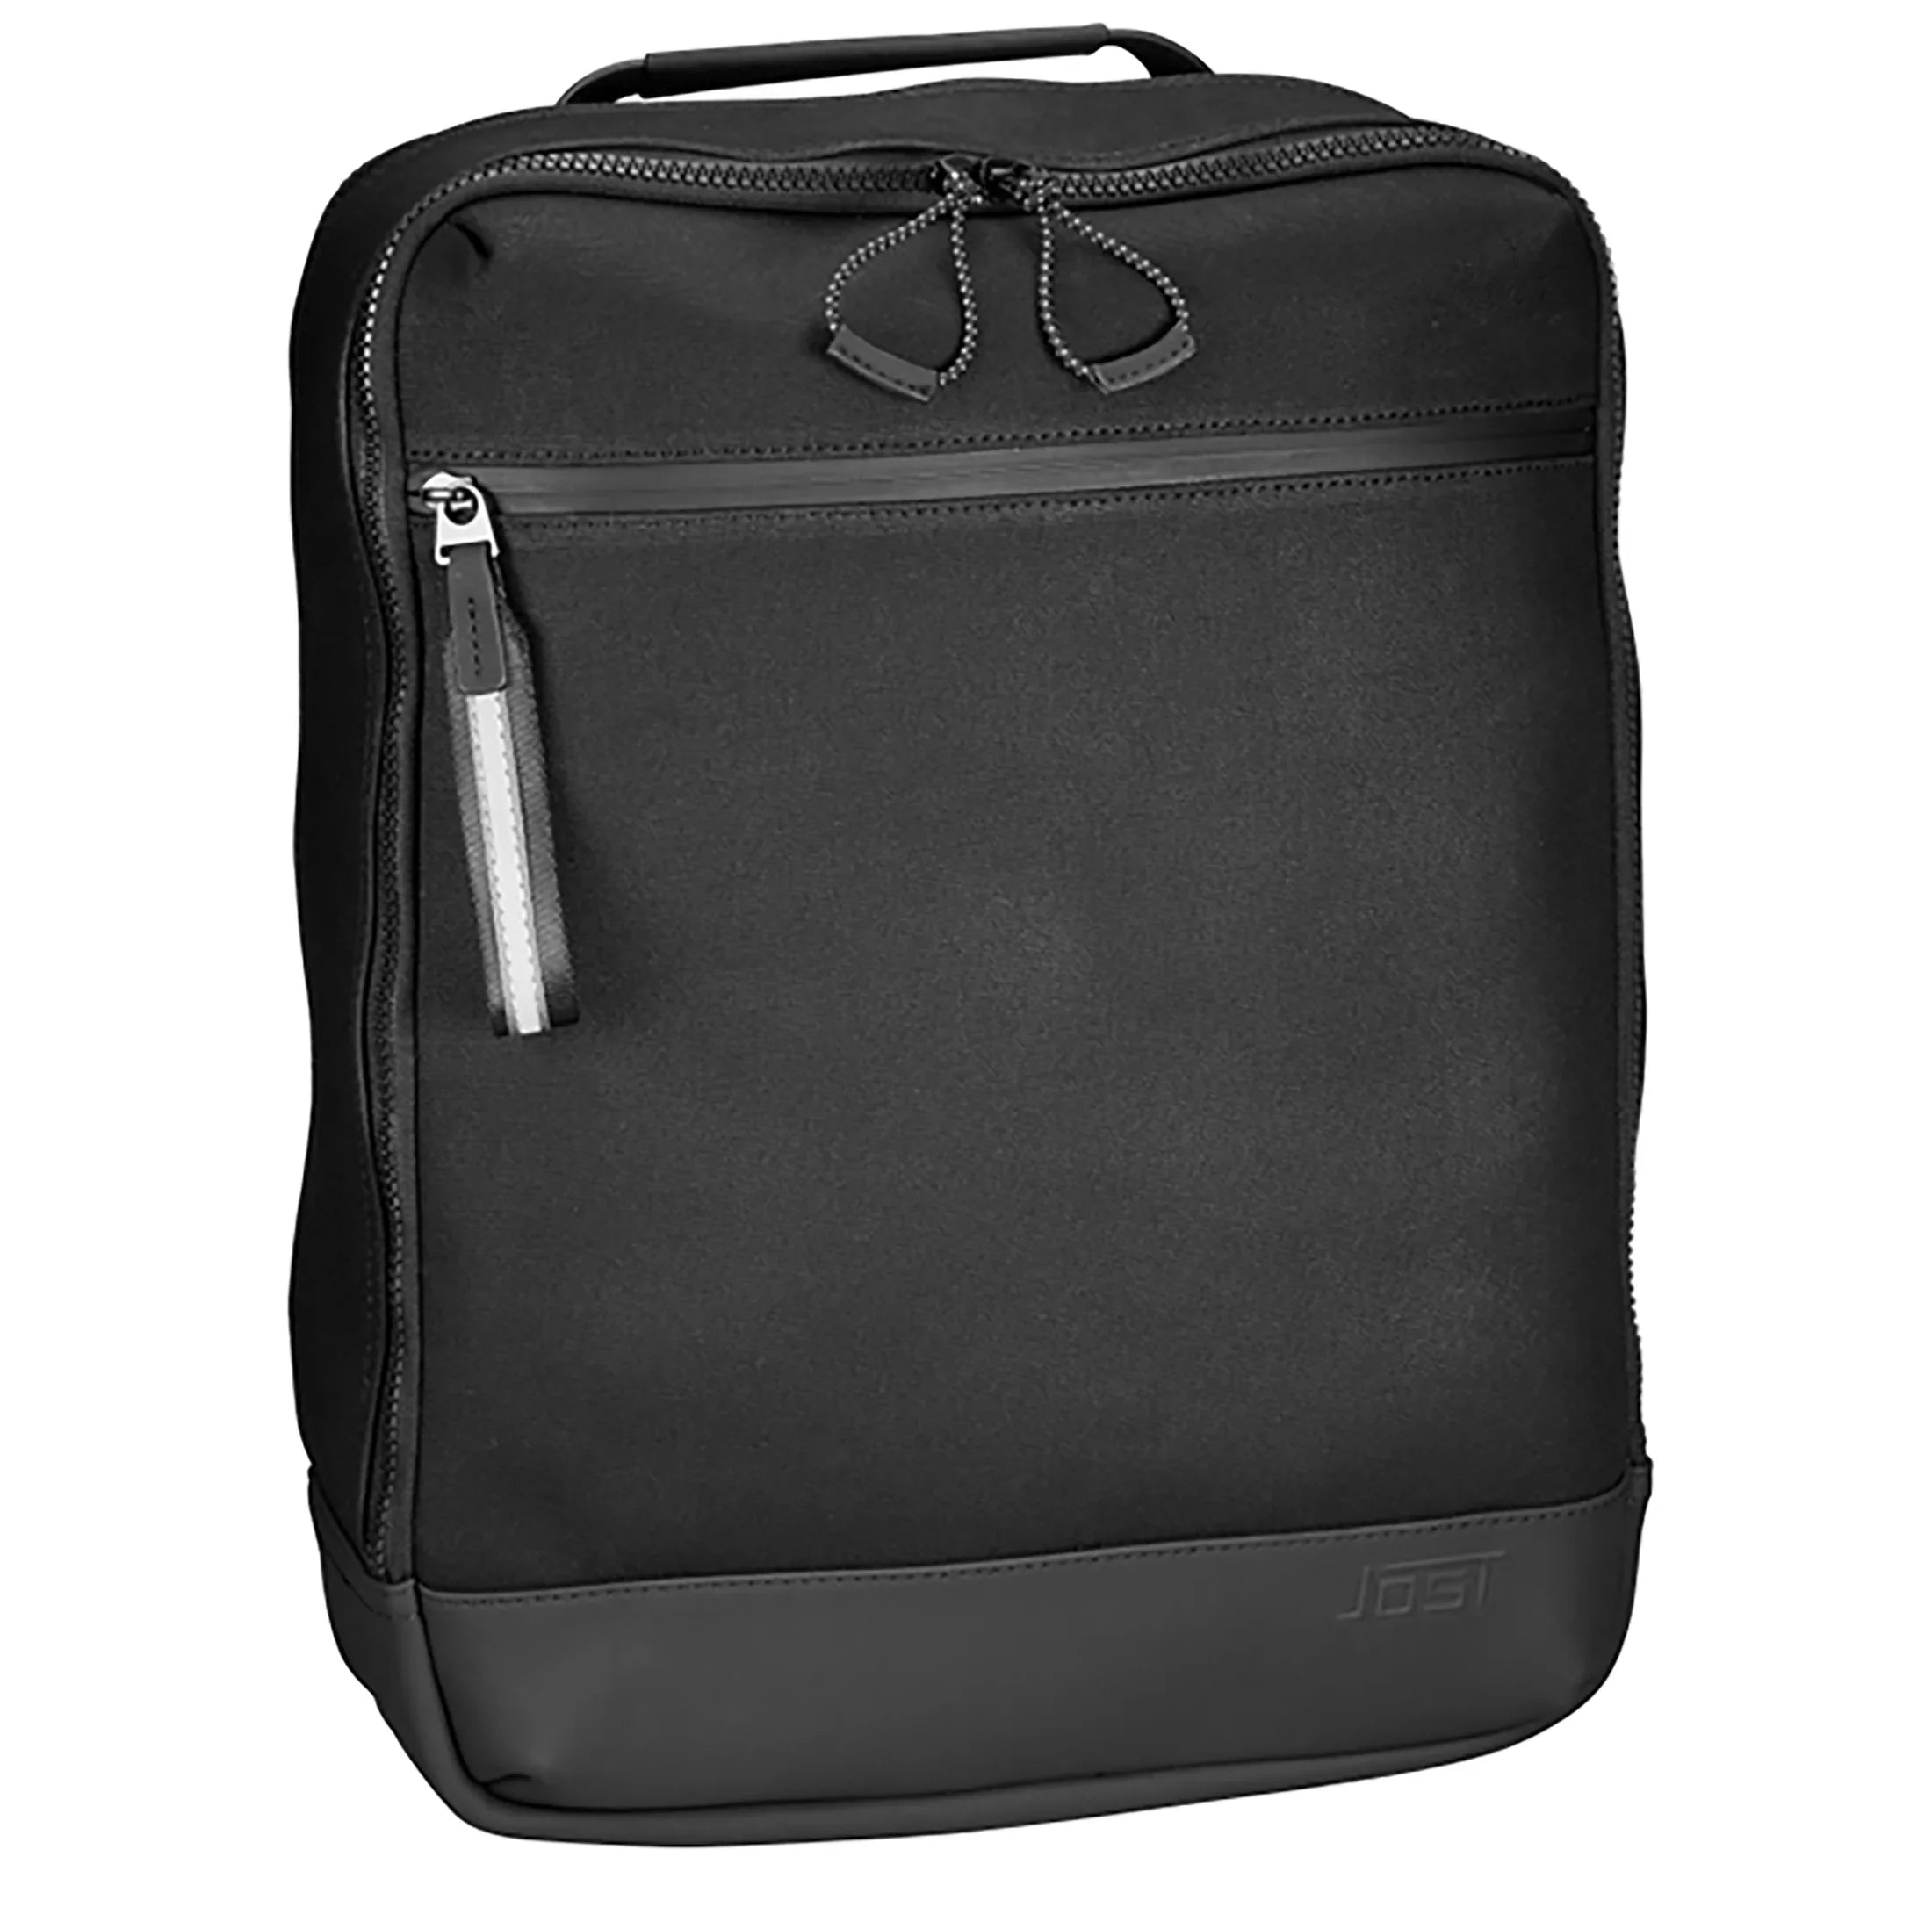 Jost Ystad daypack backpack with laptop compartment 44 cm - black